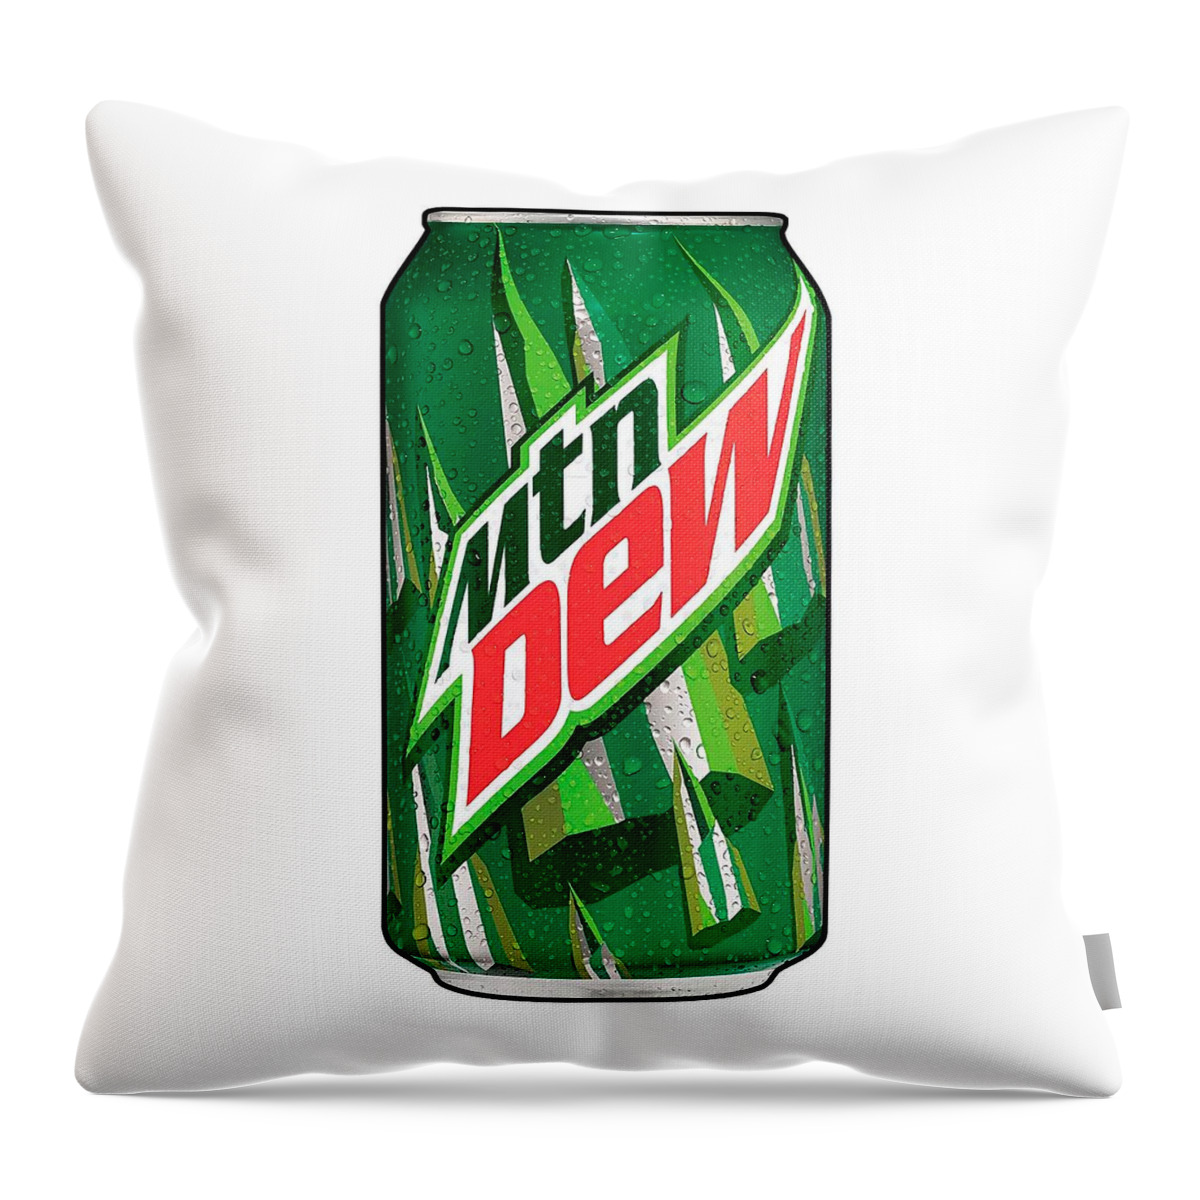 Sign Throw Pillow featuring the digital art Mtn Dew Mountain Dew Aluminum Can Sweating Advertising Sign MGS281 by Cody Cookston